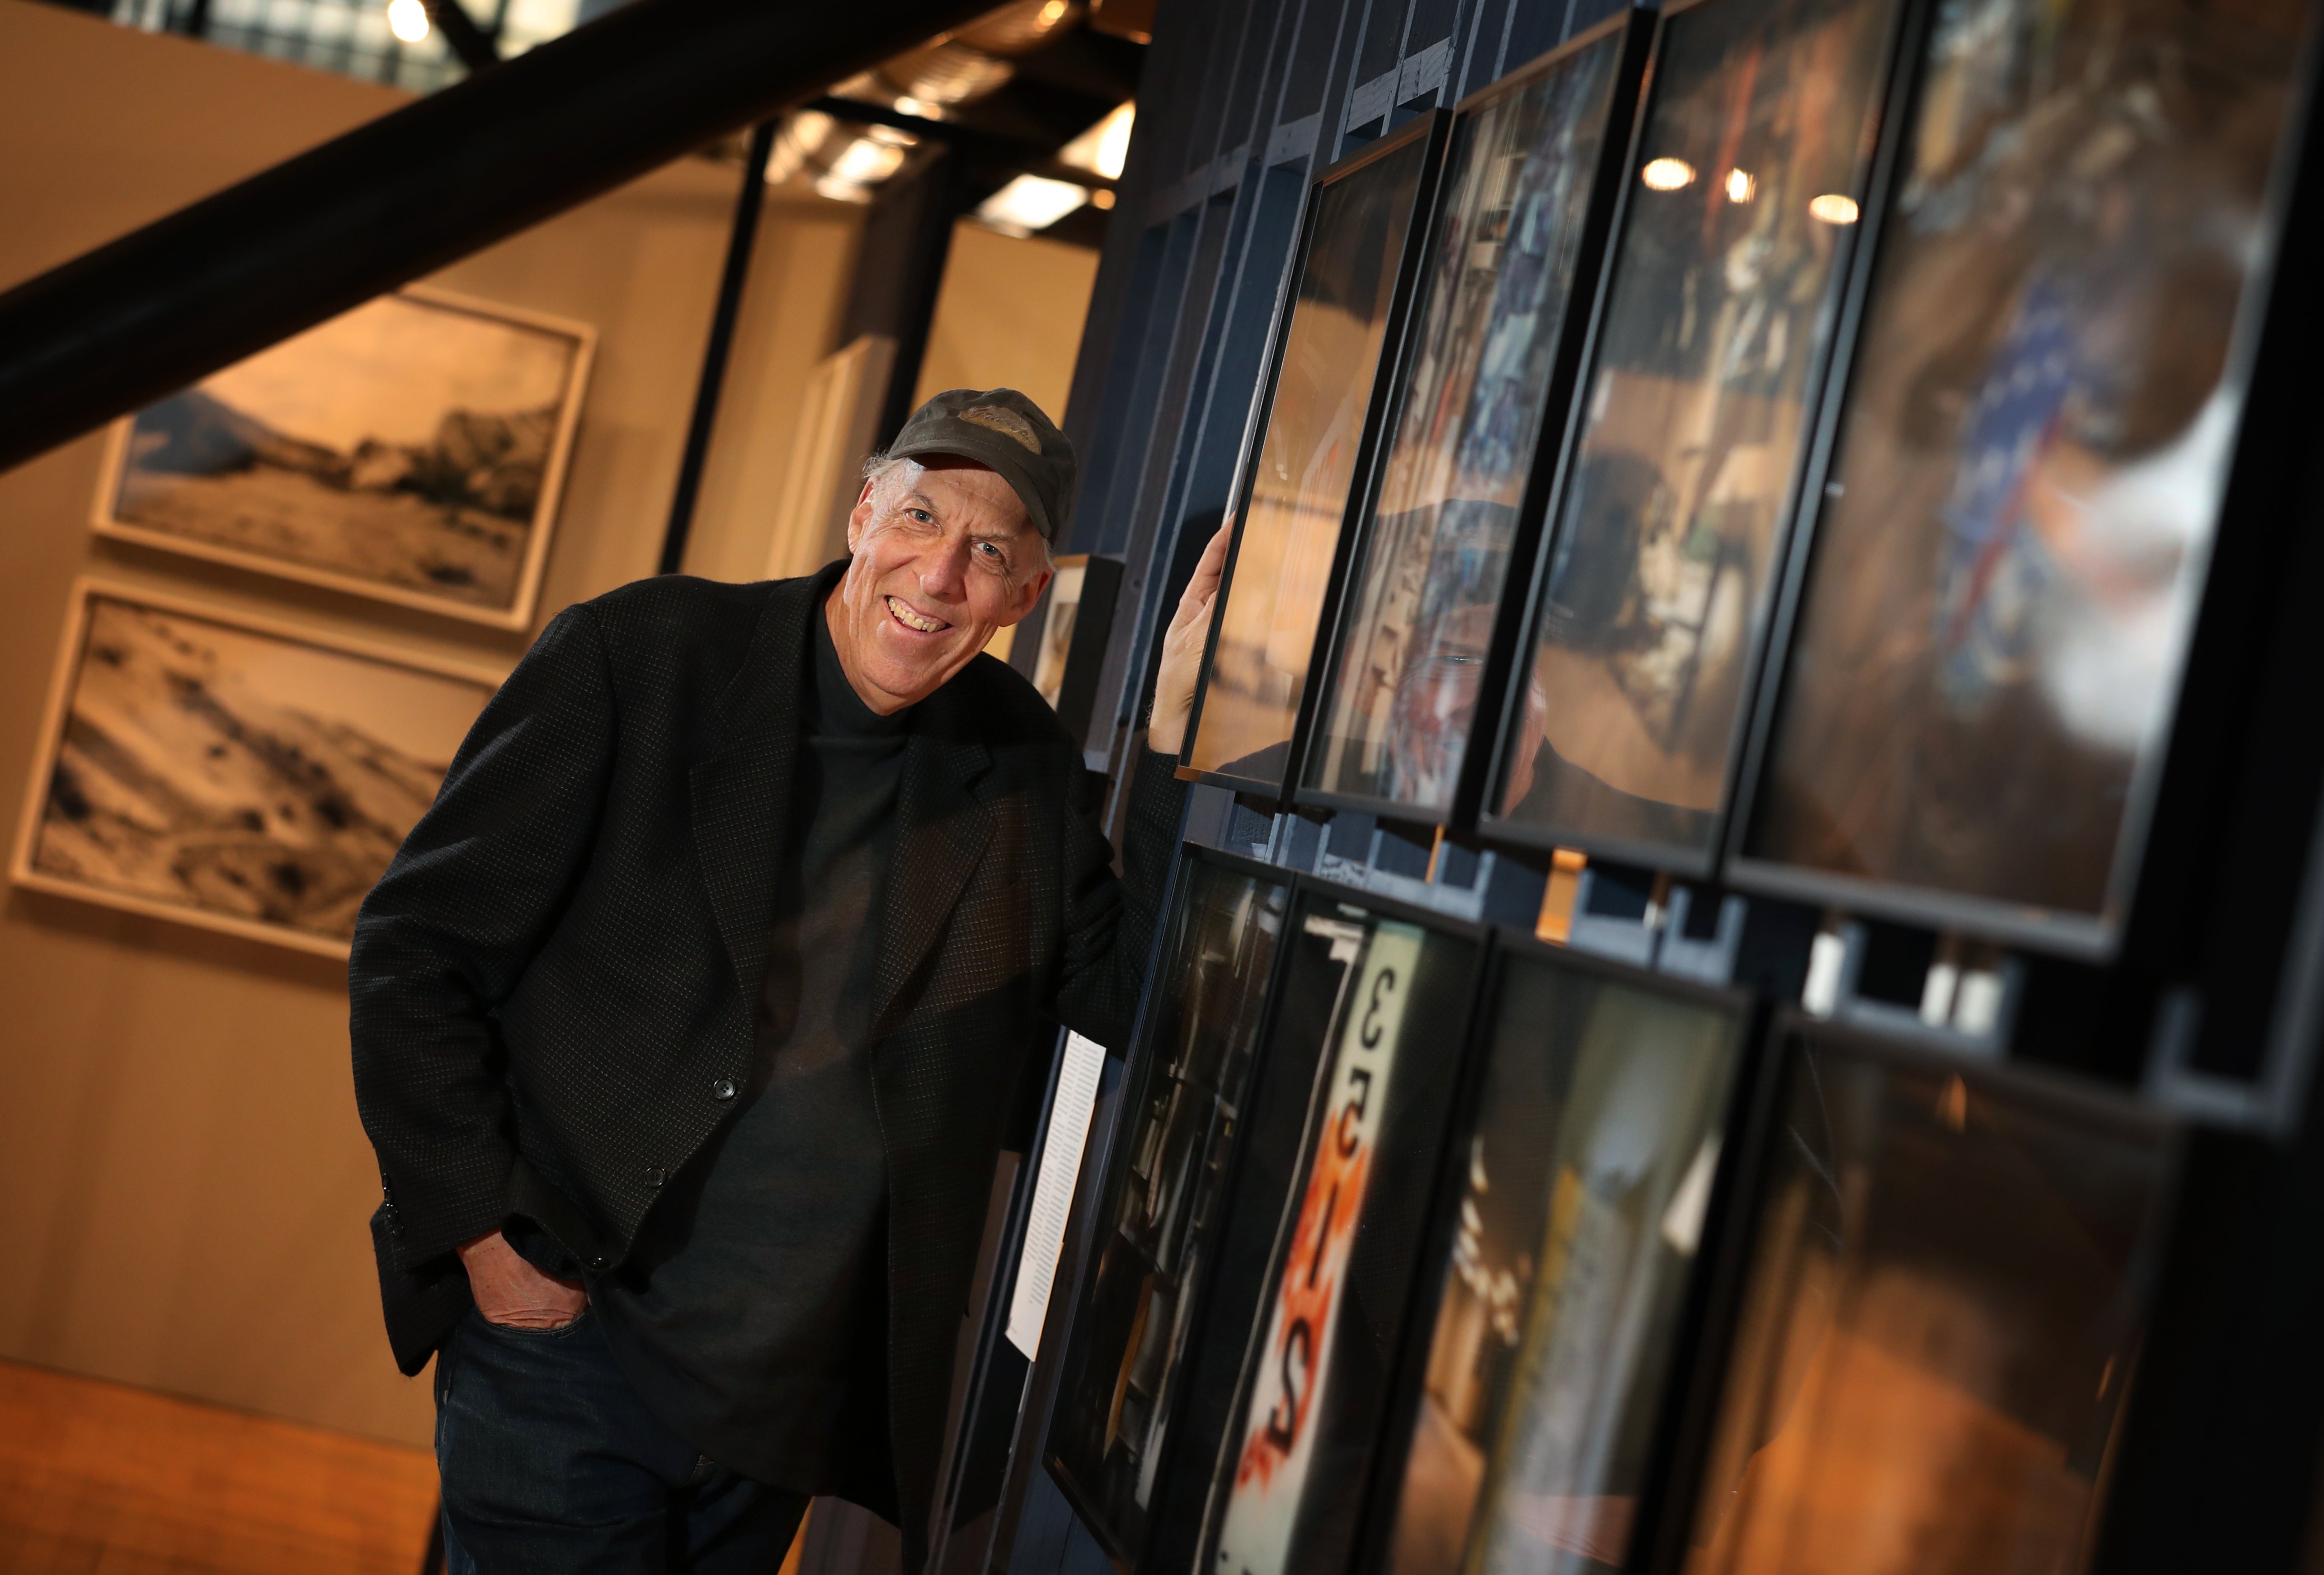 Photographer Douglas McCulloh is the Senior Curator for California Museum of Photography. He recently curated the exhibition "In the Sunshine of Neglect", which features 194 works from 54 photographers including himself.  (UCR/Stan Lim)